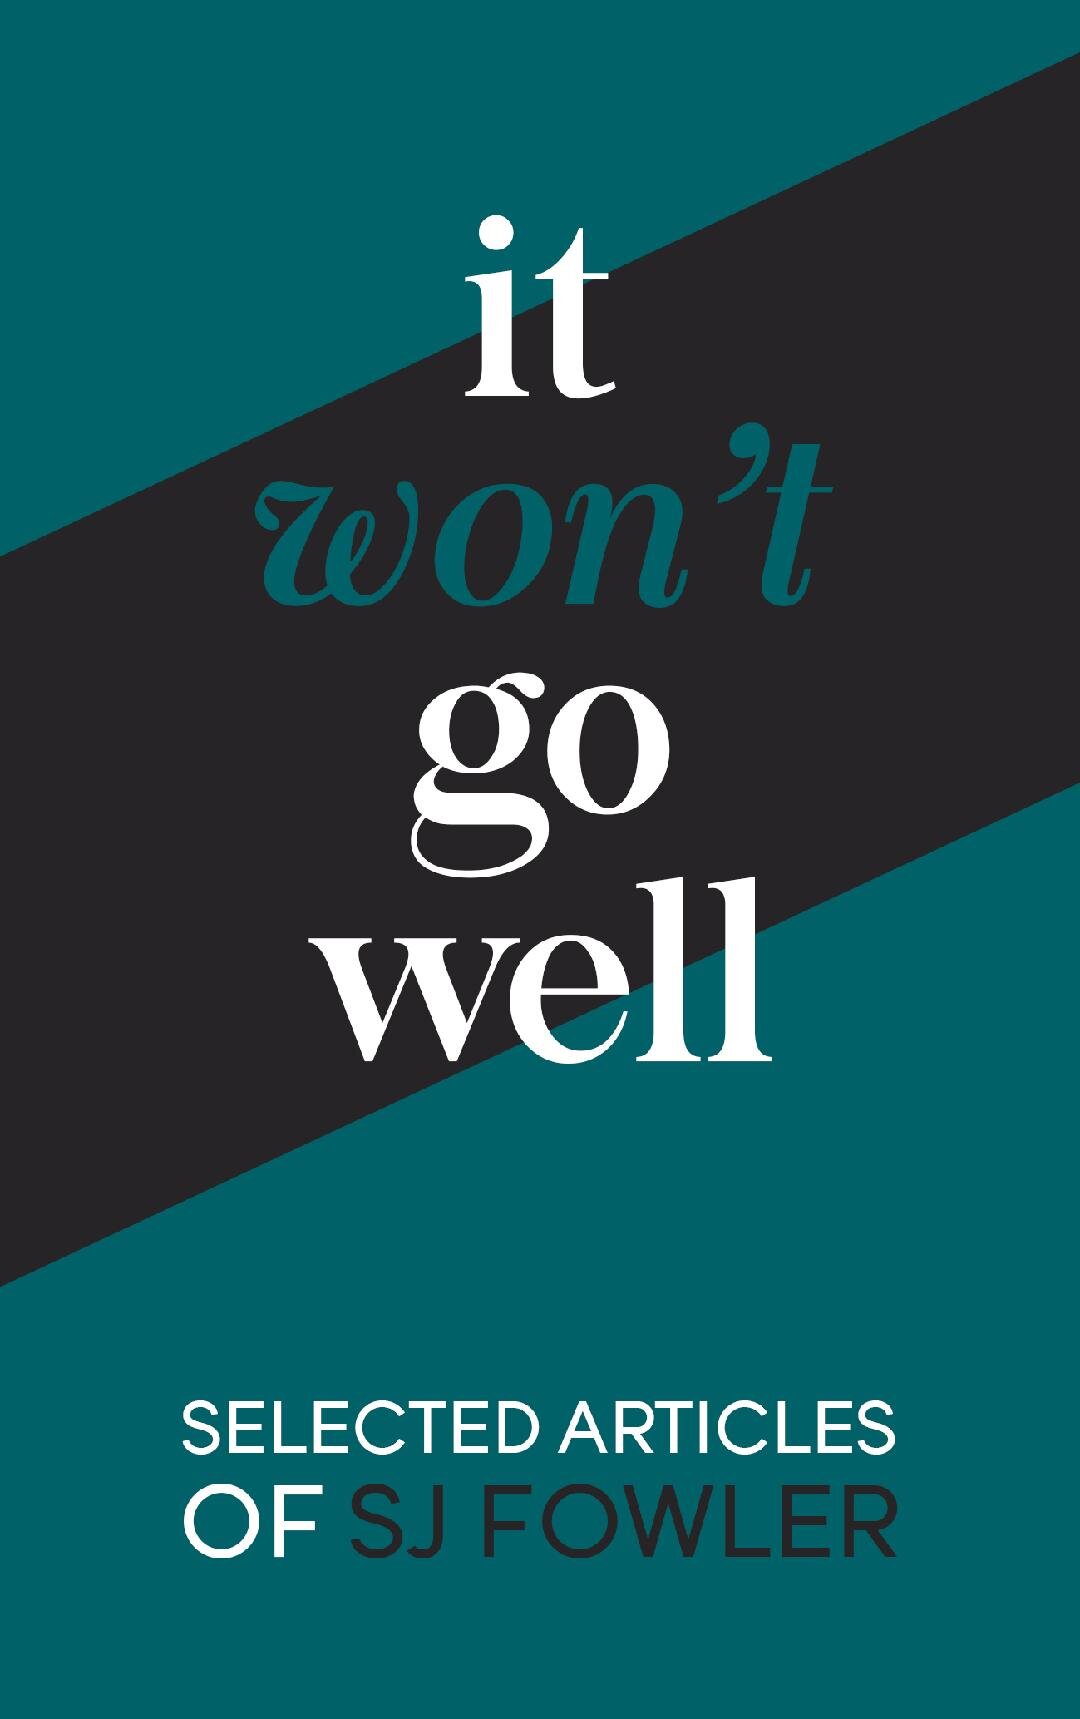 itwontgowell cover.jpg